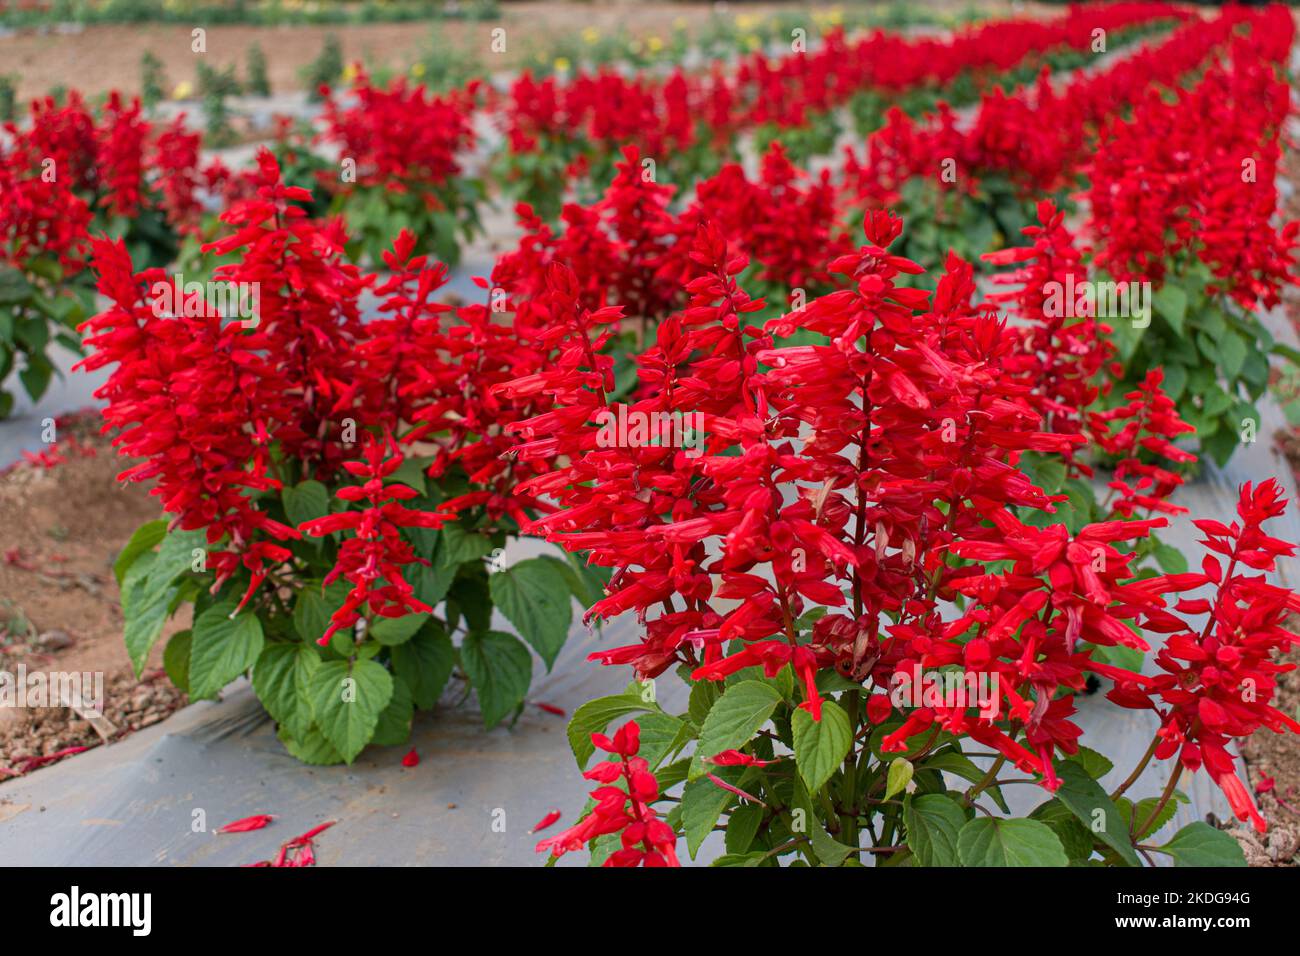 Red Salvia flowers blooming in the garden, beautiful flower background. Stock Photo